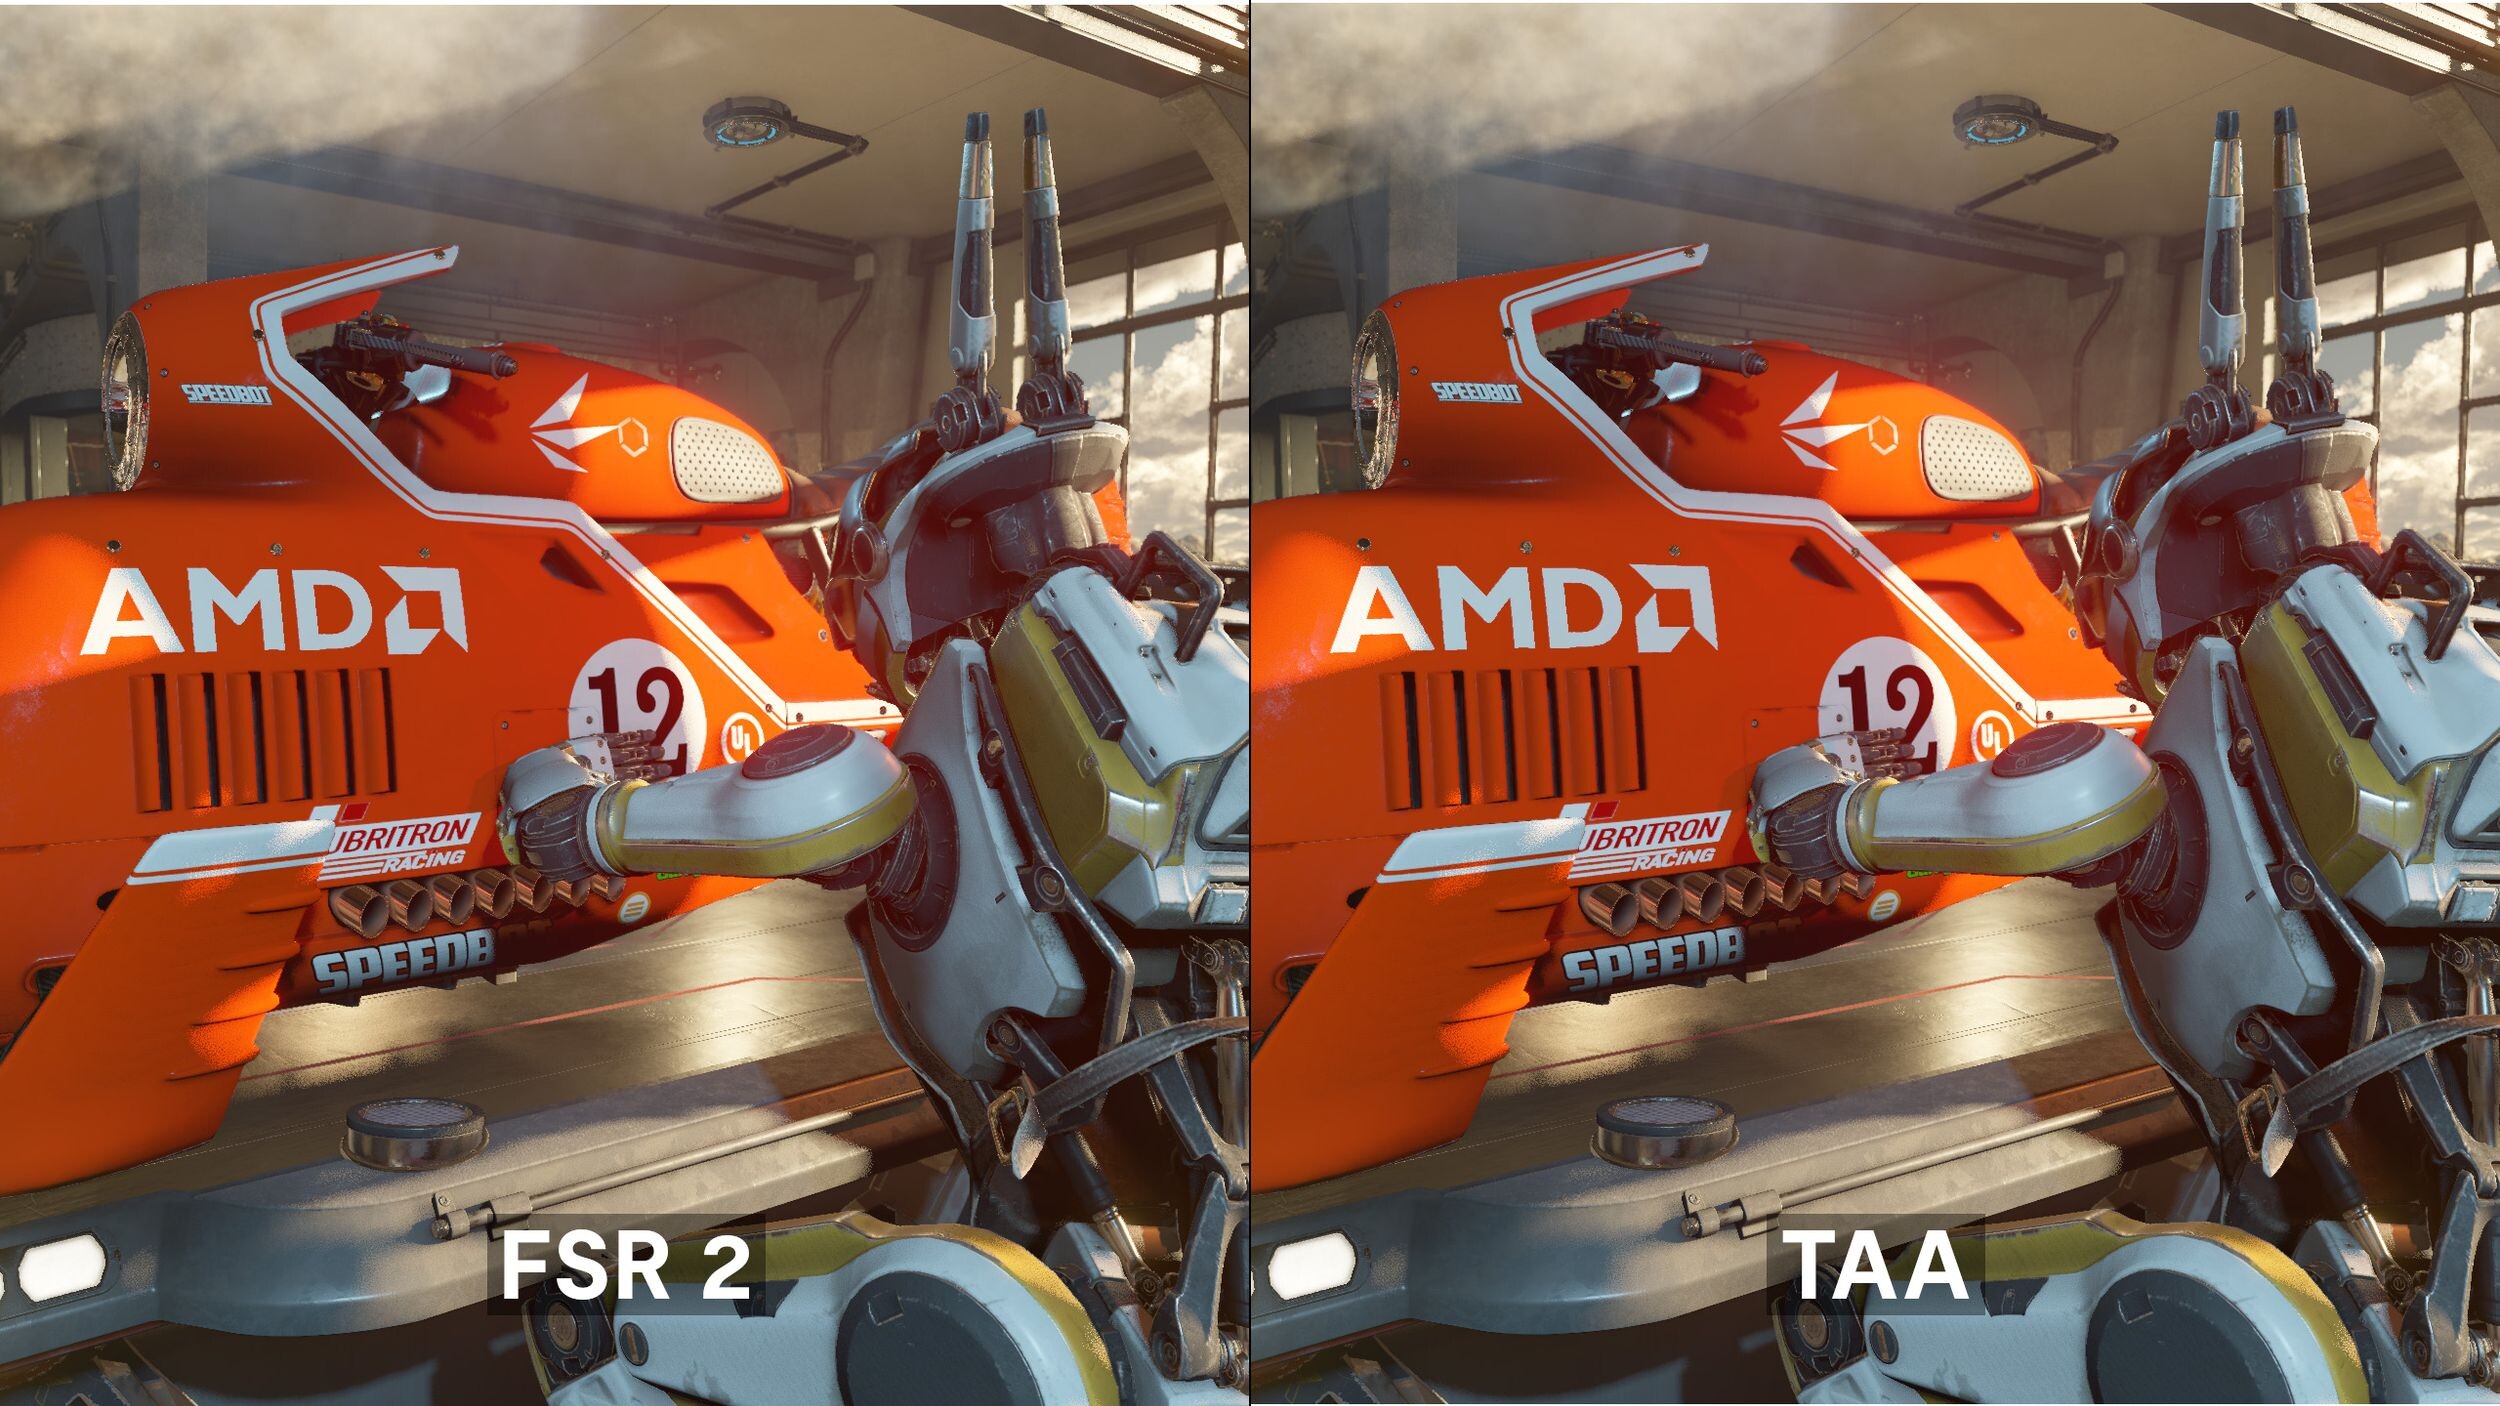 3DMark NVIDIA DLSS feature test adds DLSS 3 support. · 3DMark